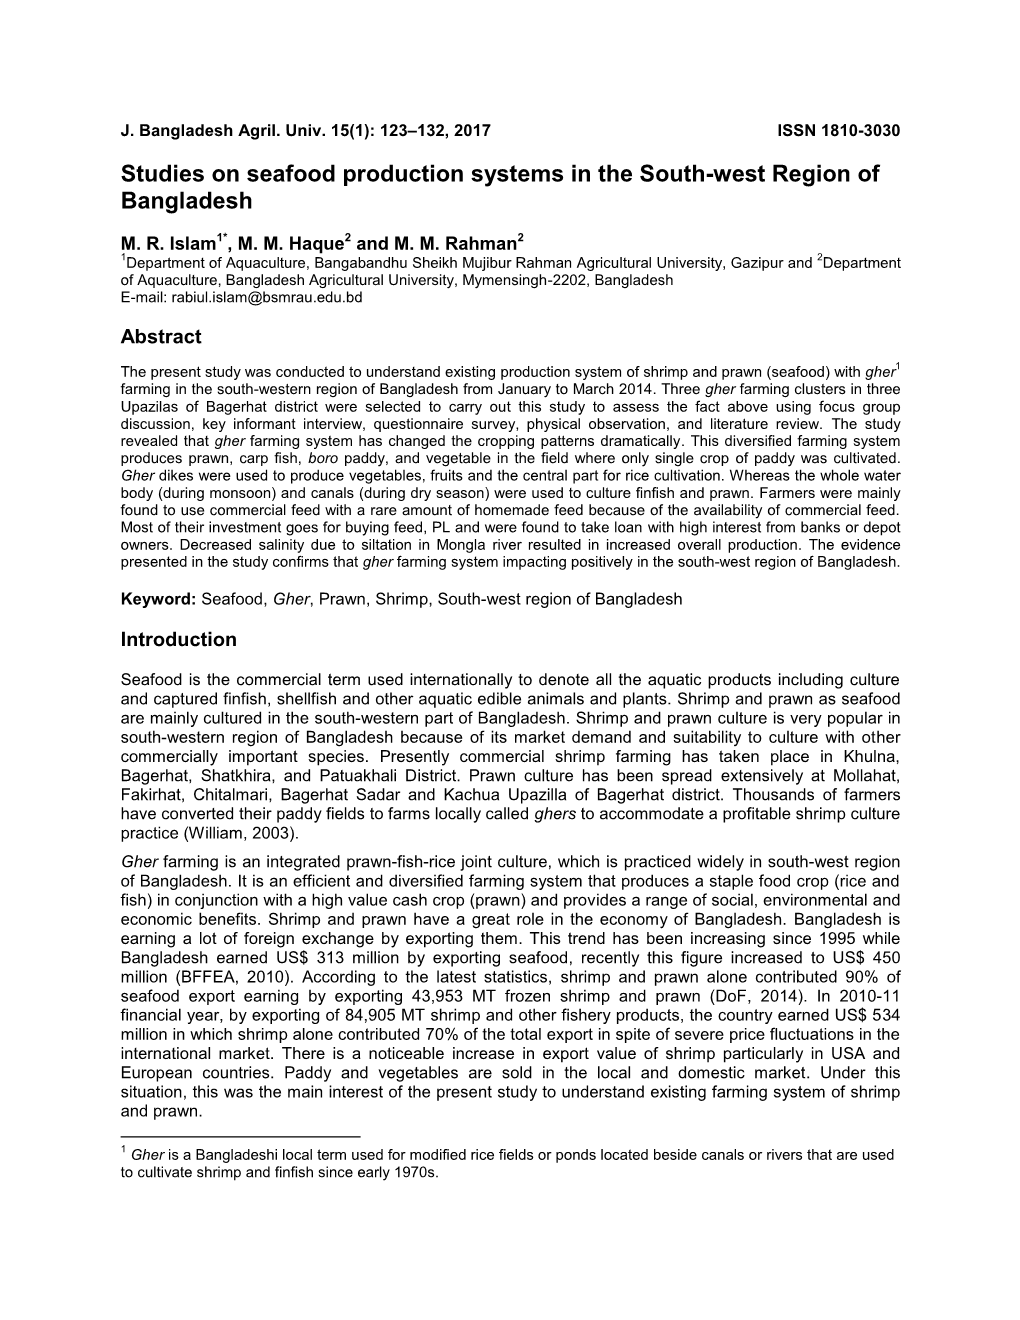 Studies on Seafood Production Systems in the South-West Region of Bangladesh